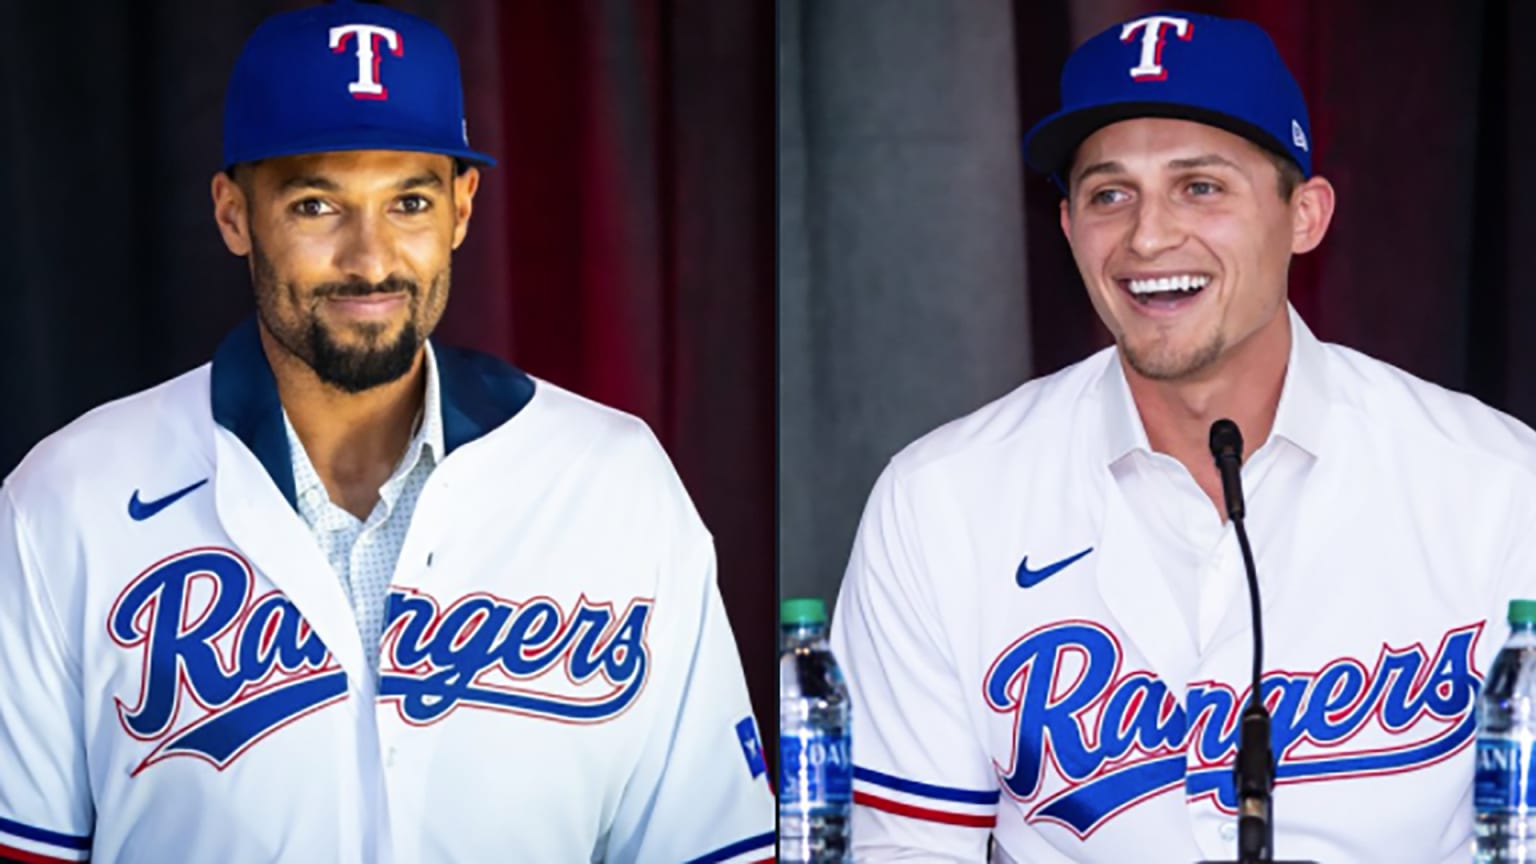 Marcus Semien and Corey Seager in Rangers uniforms youngster with an almost identical stance